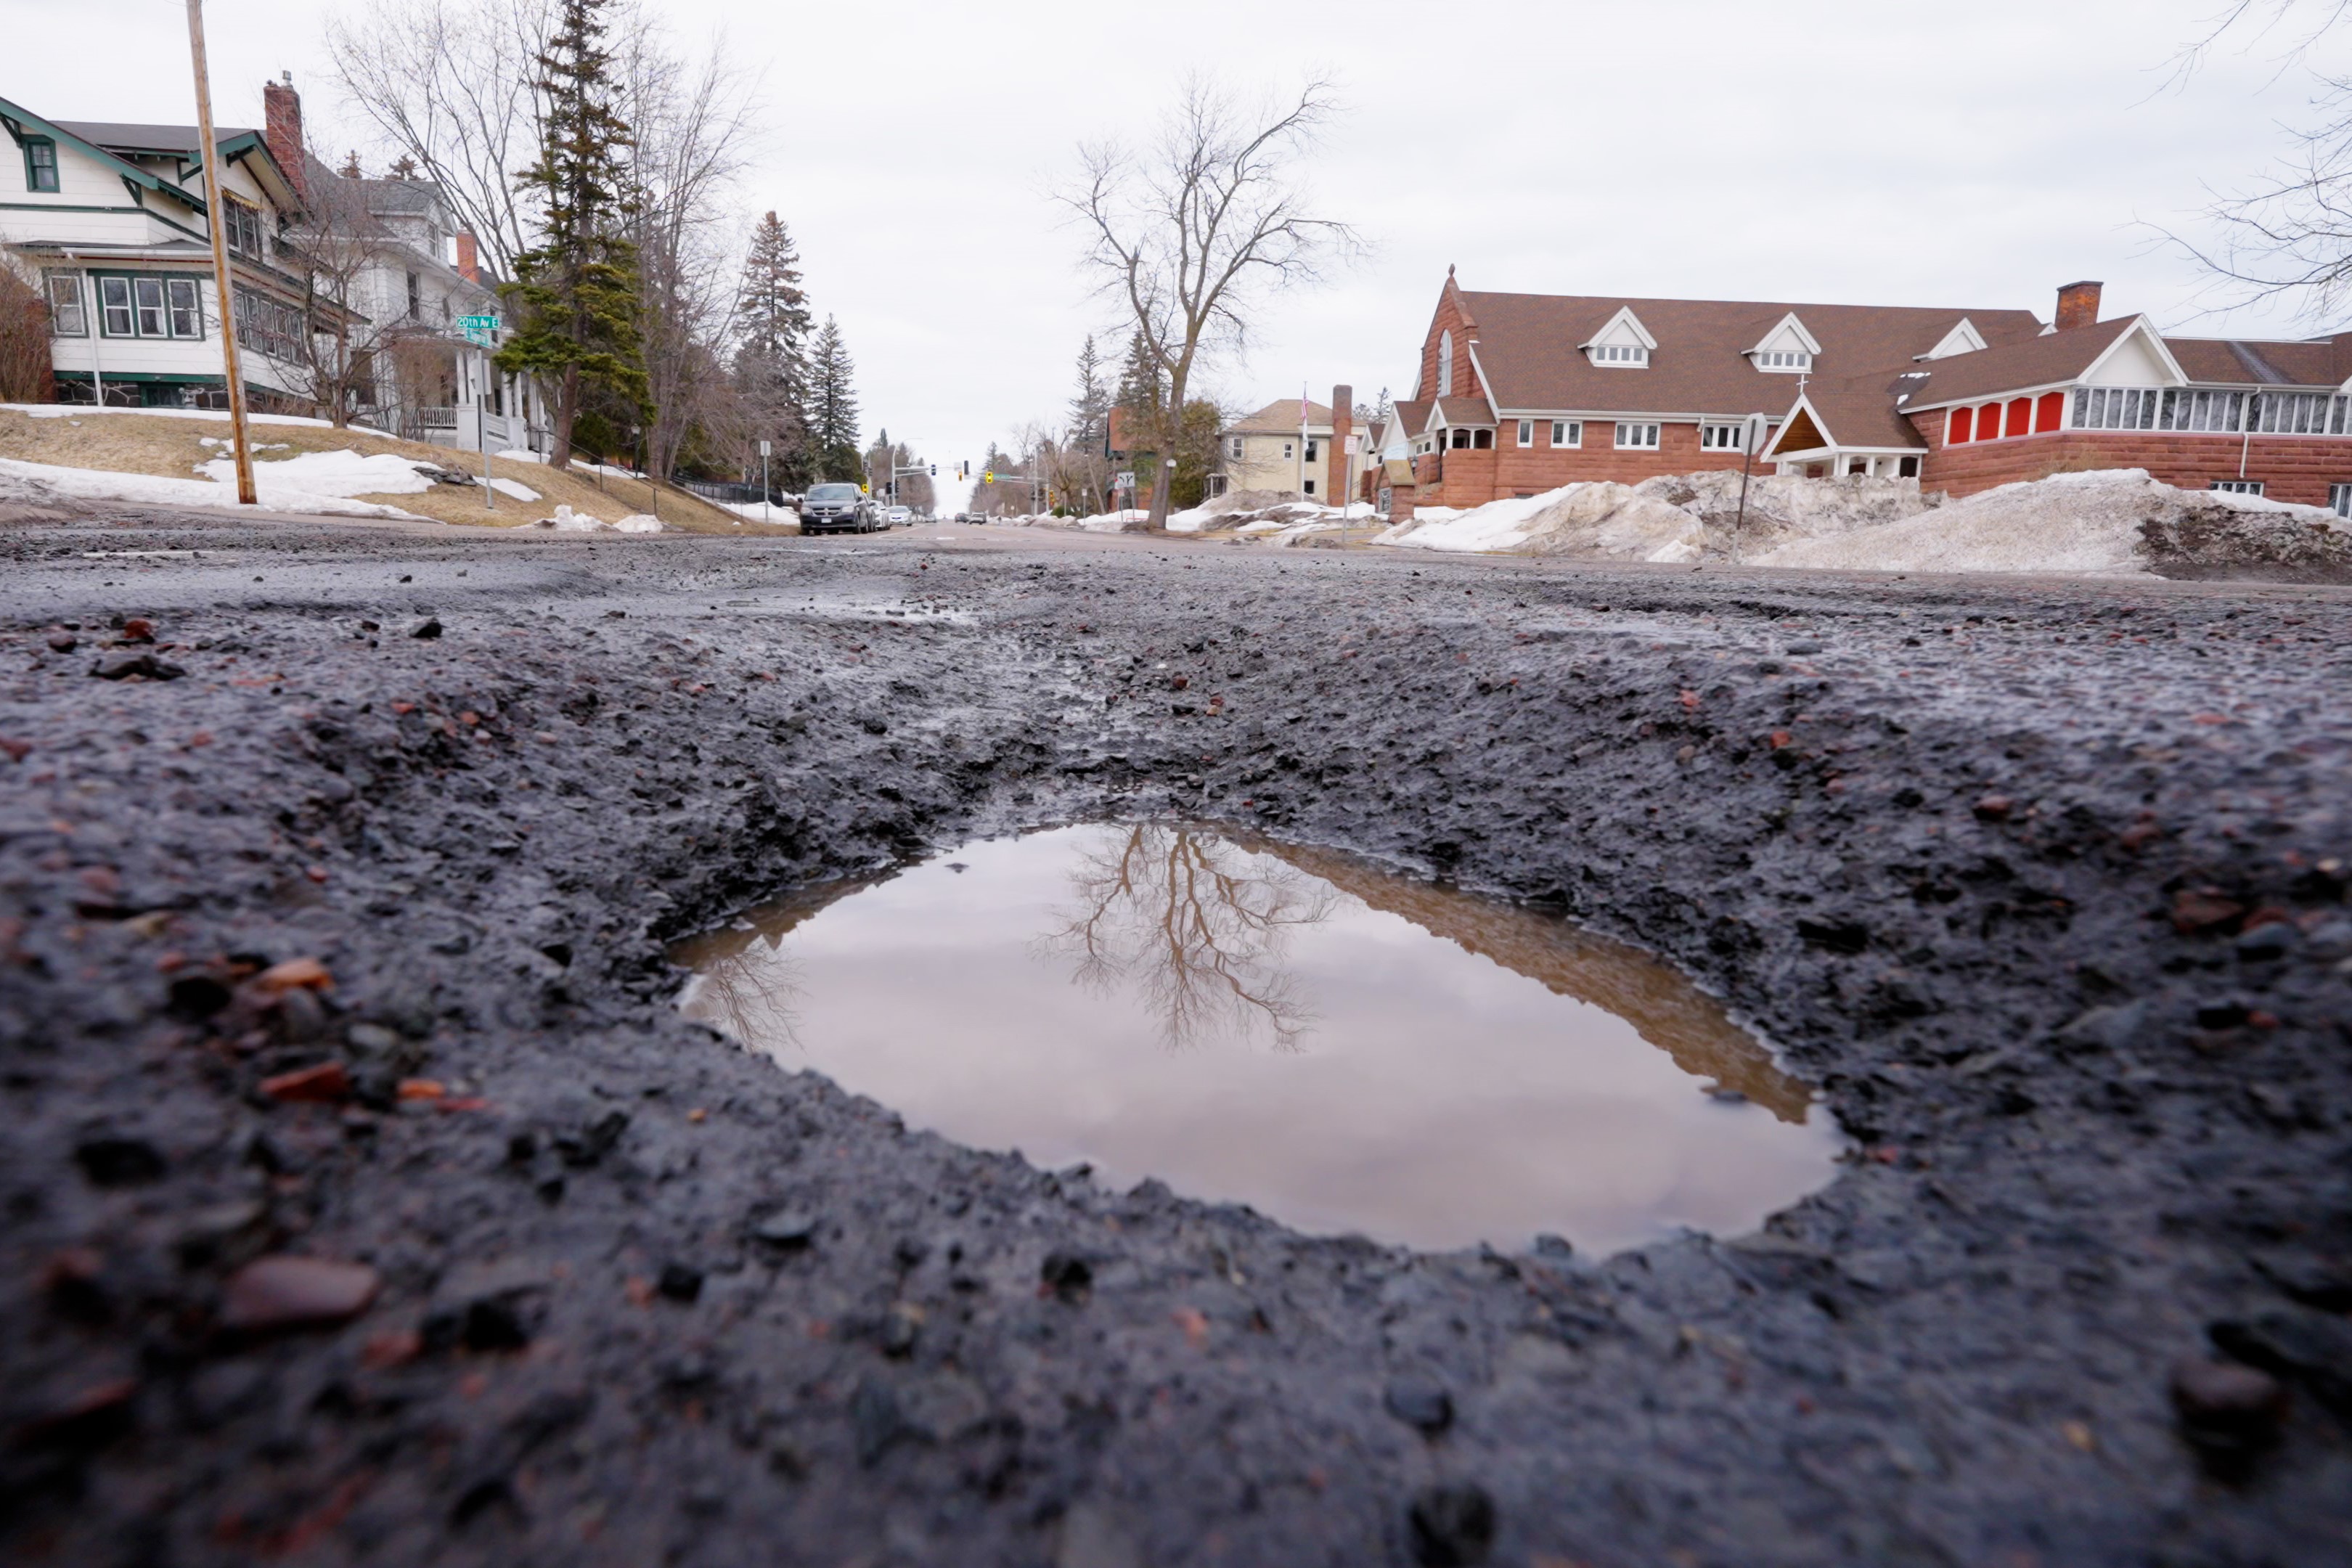 A street-level view of a pothole filled with water with houses and snowbanks in the background